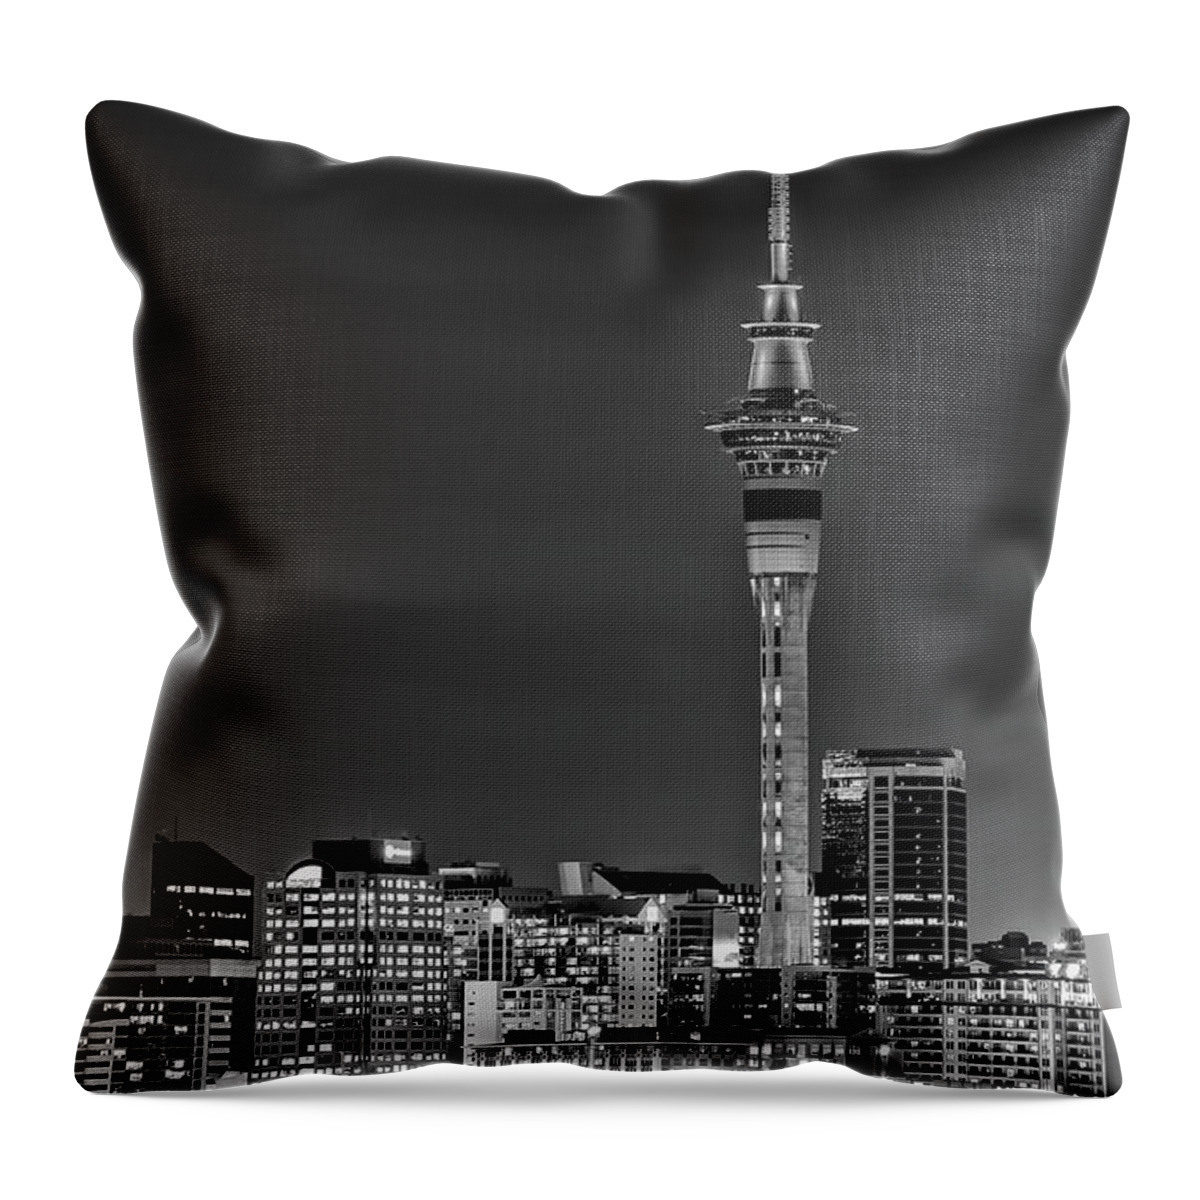 Auckland-sky-tower Throw Pillow featuring the photograph Auckland Sky Tower by Gary Johnson